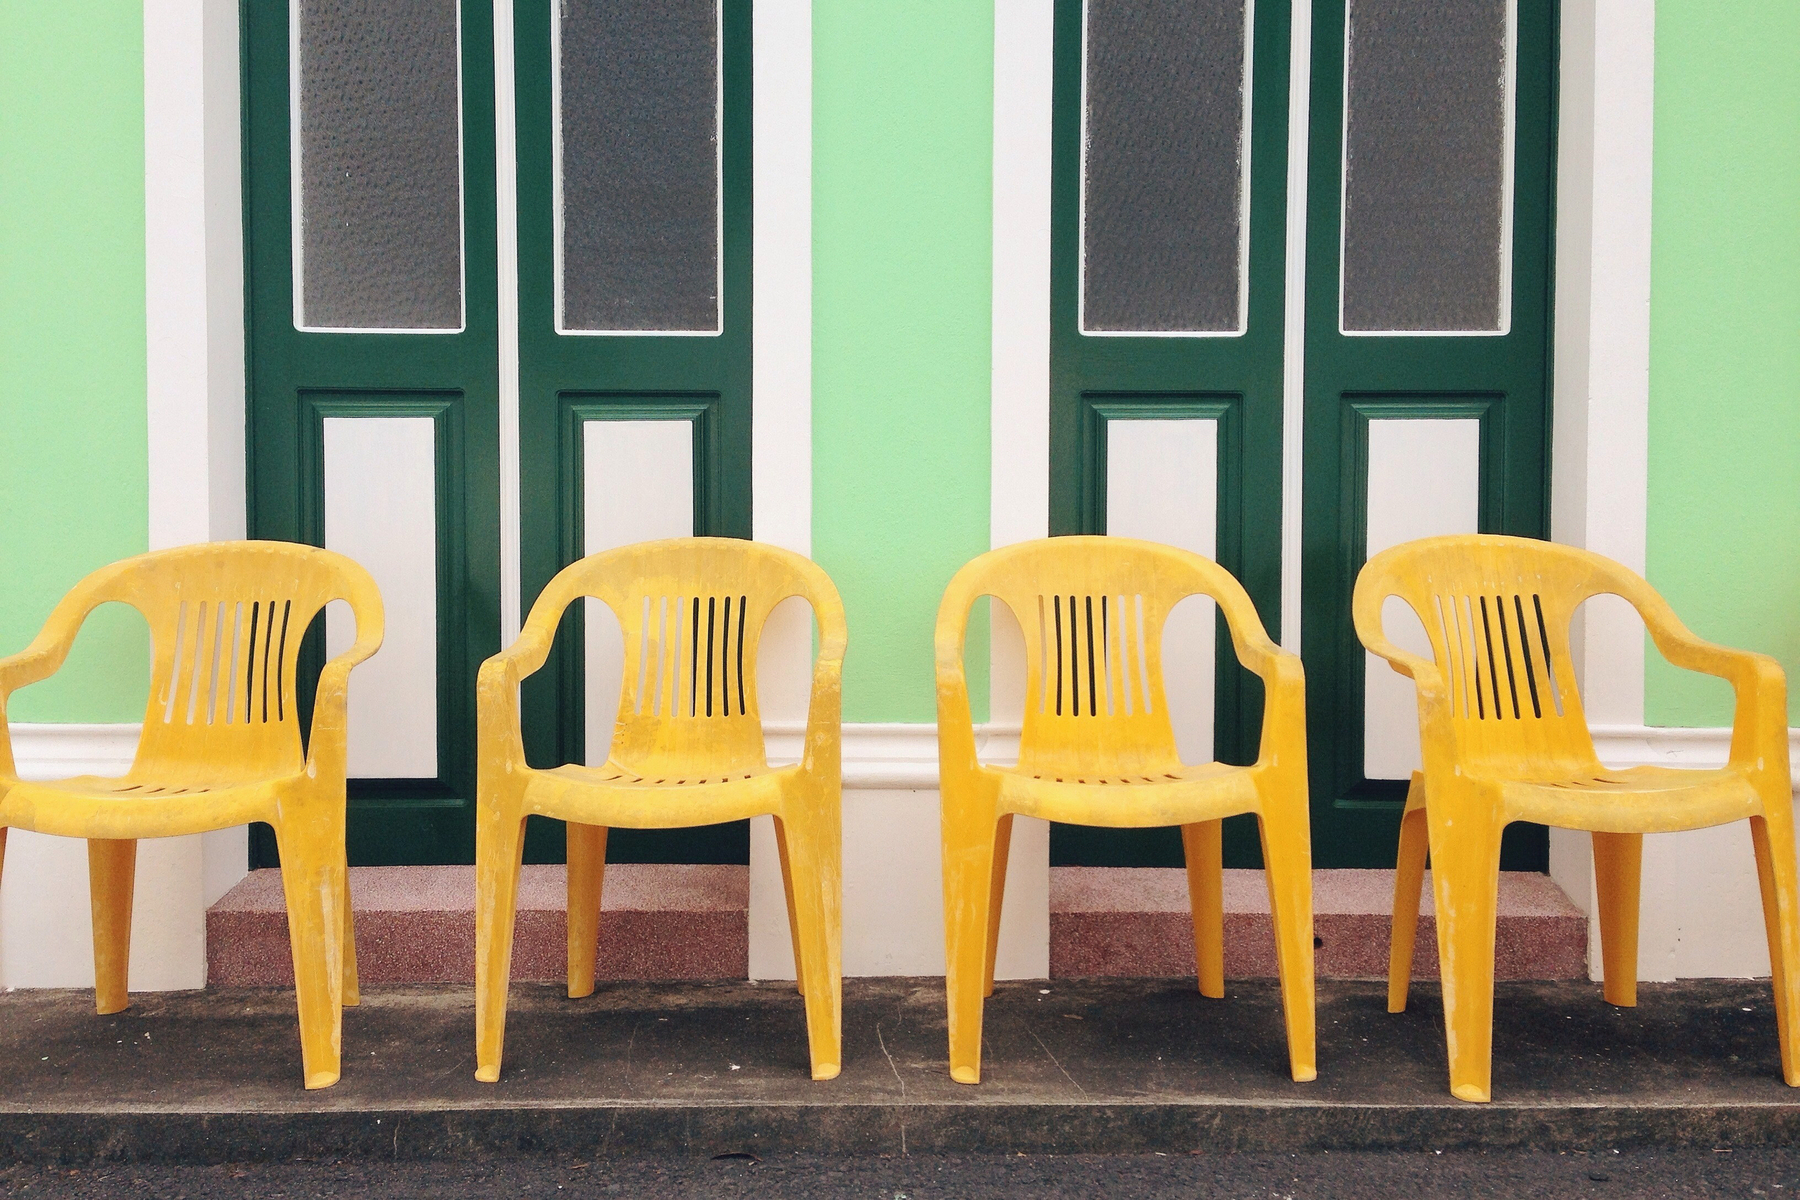 Four yellow plastic chairs neatly arranged against a green wall with green doors. 